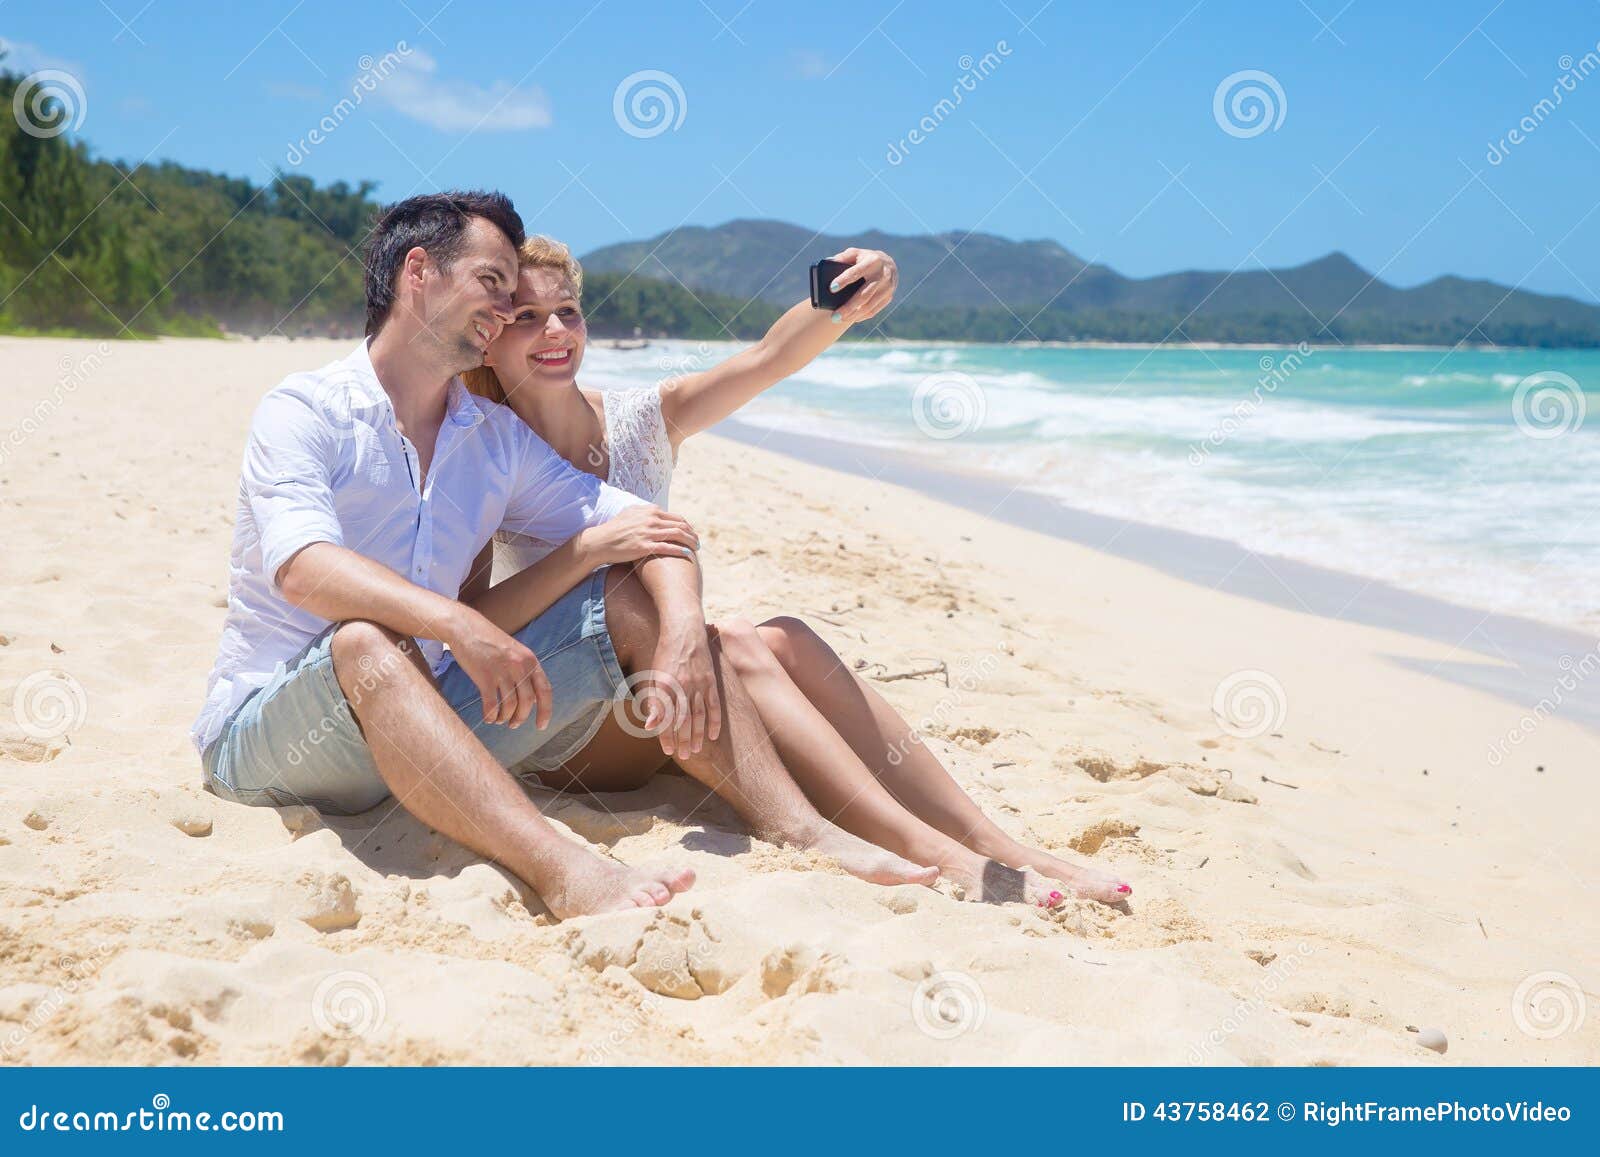 21,256 Couple Posing Beach Royalty-Free Photos and Stock Images |  Shutterstock